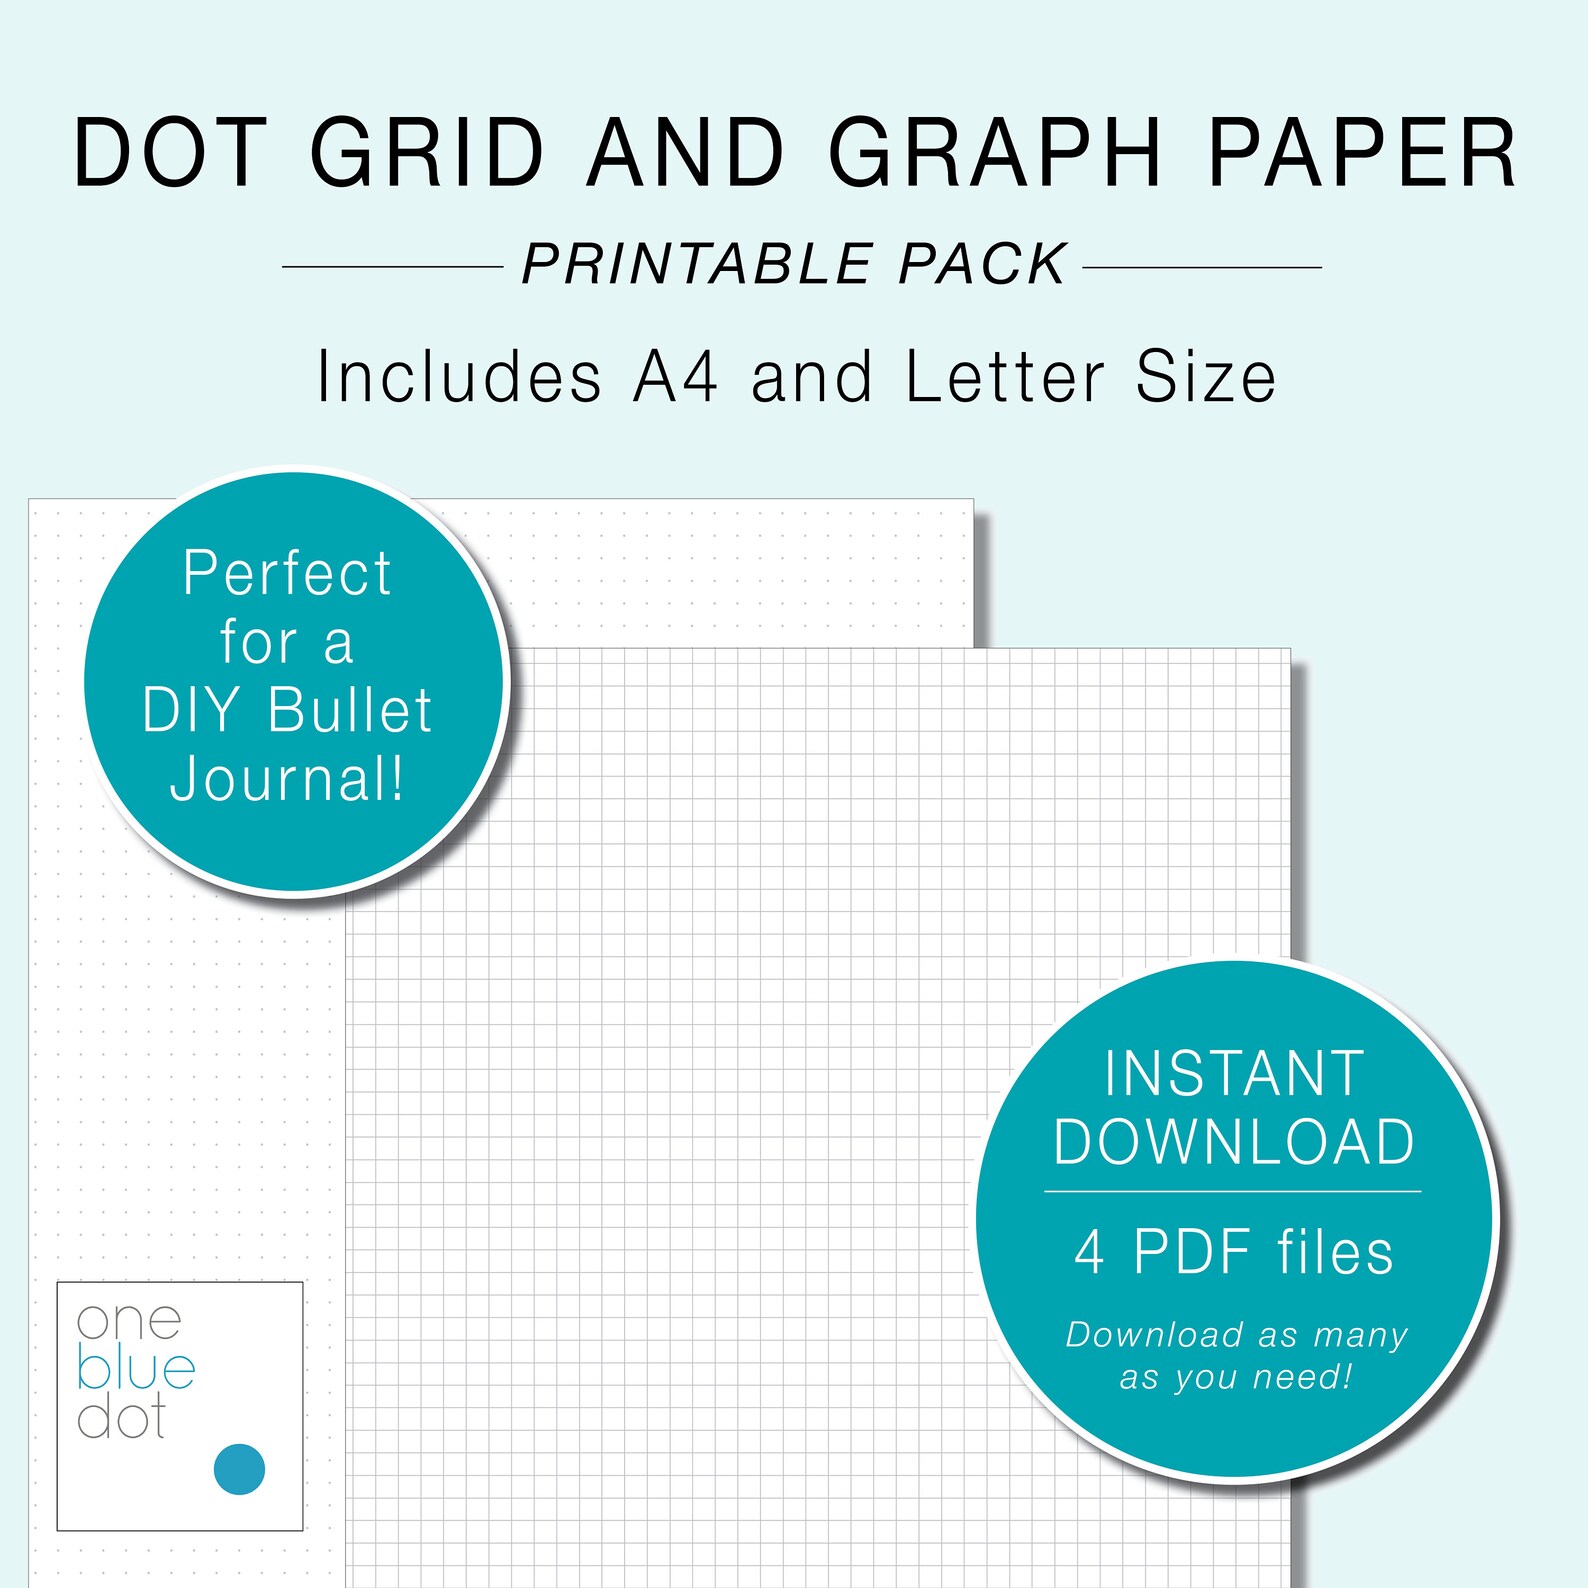 printable-dot-grid-paper-graph-paper-a4-and-letter-size-5mm-etsy